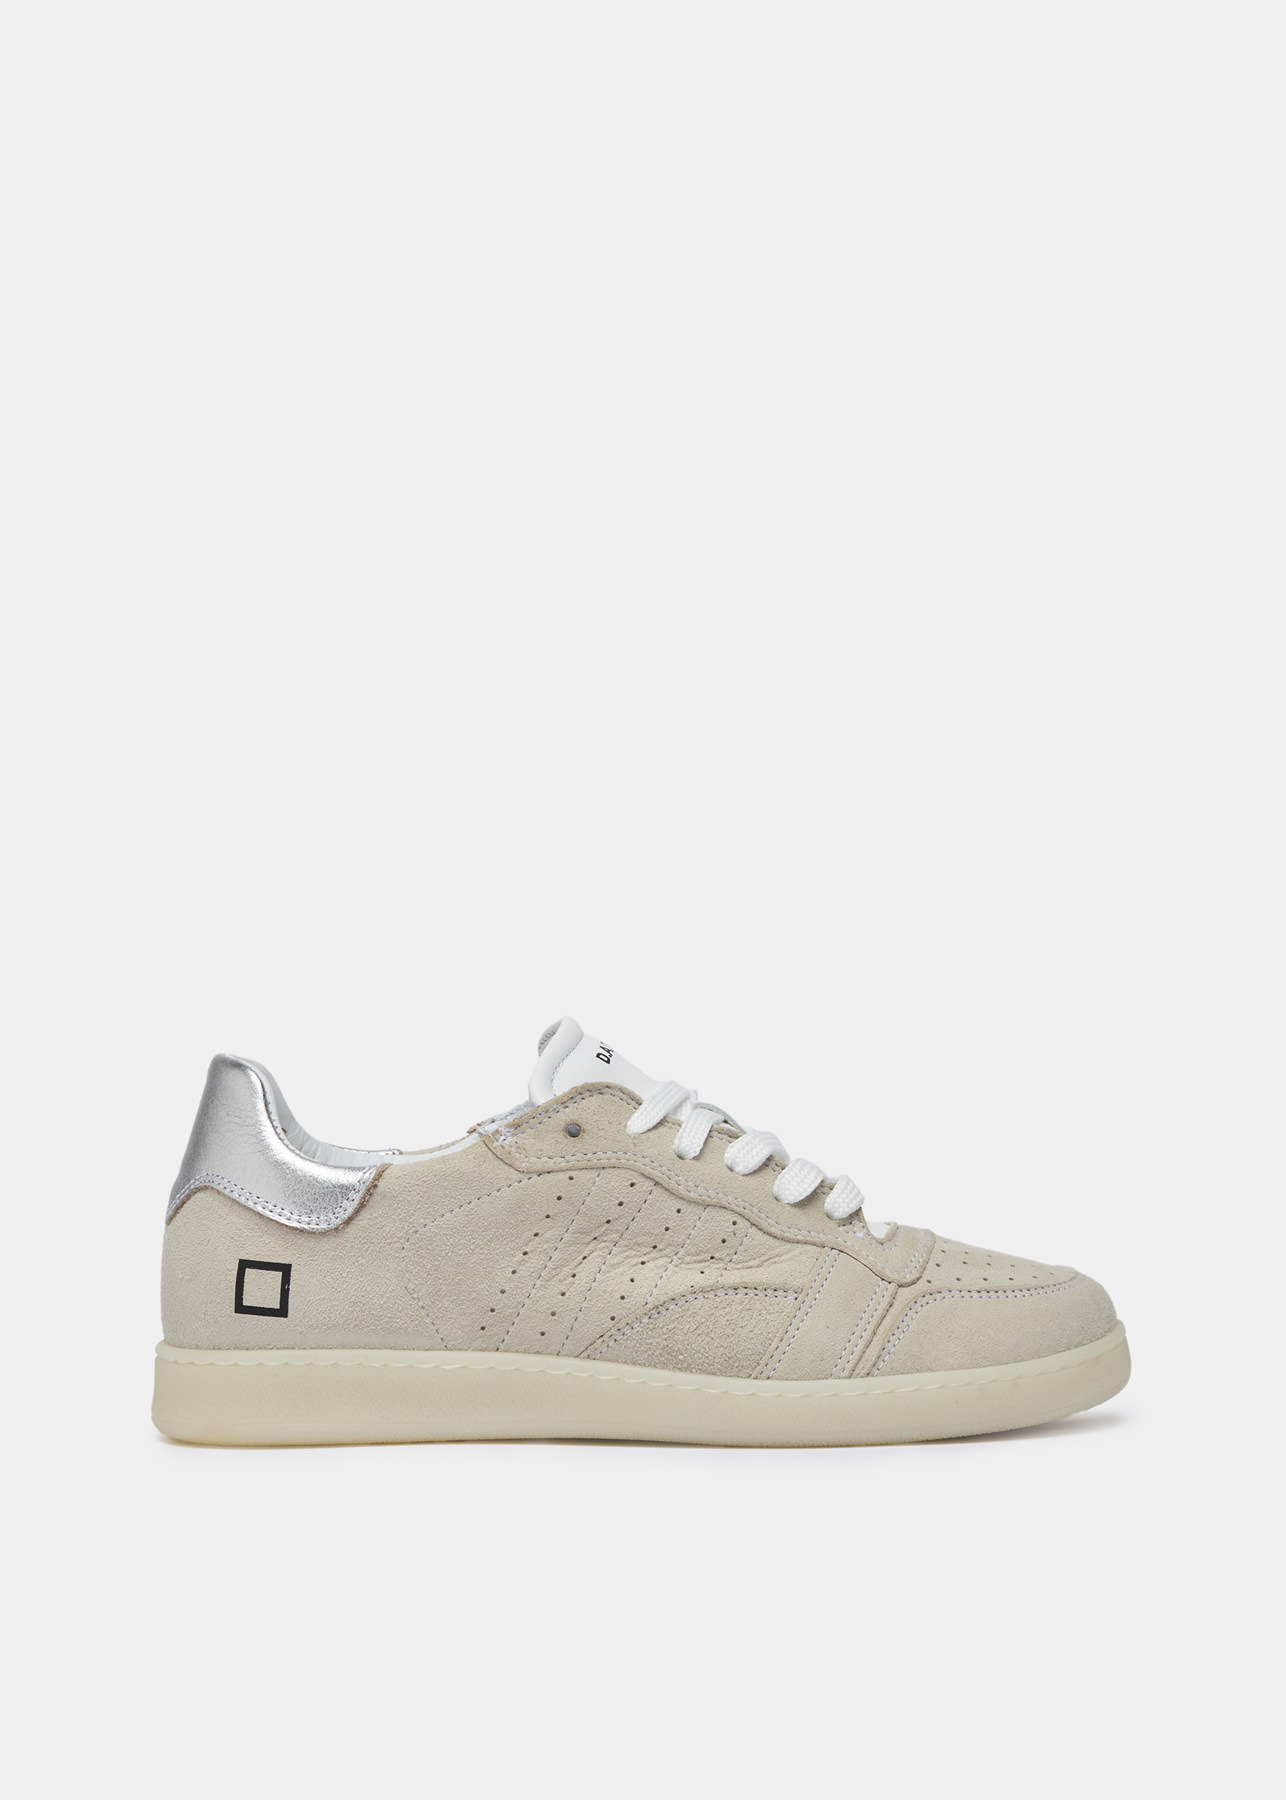 D.A.T.E Stardust Cream Sporty Low Trainers